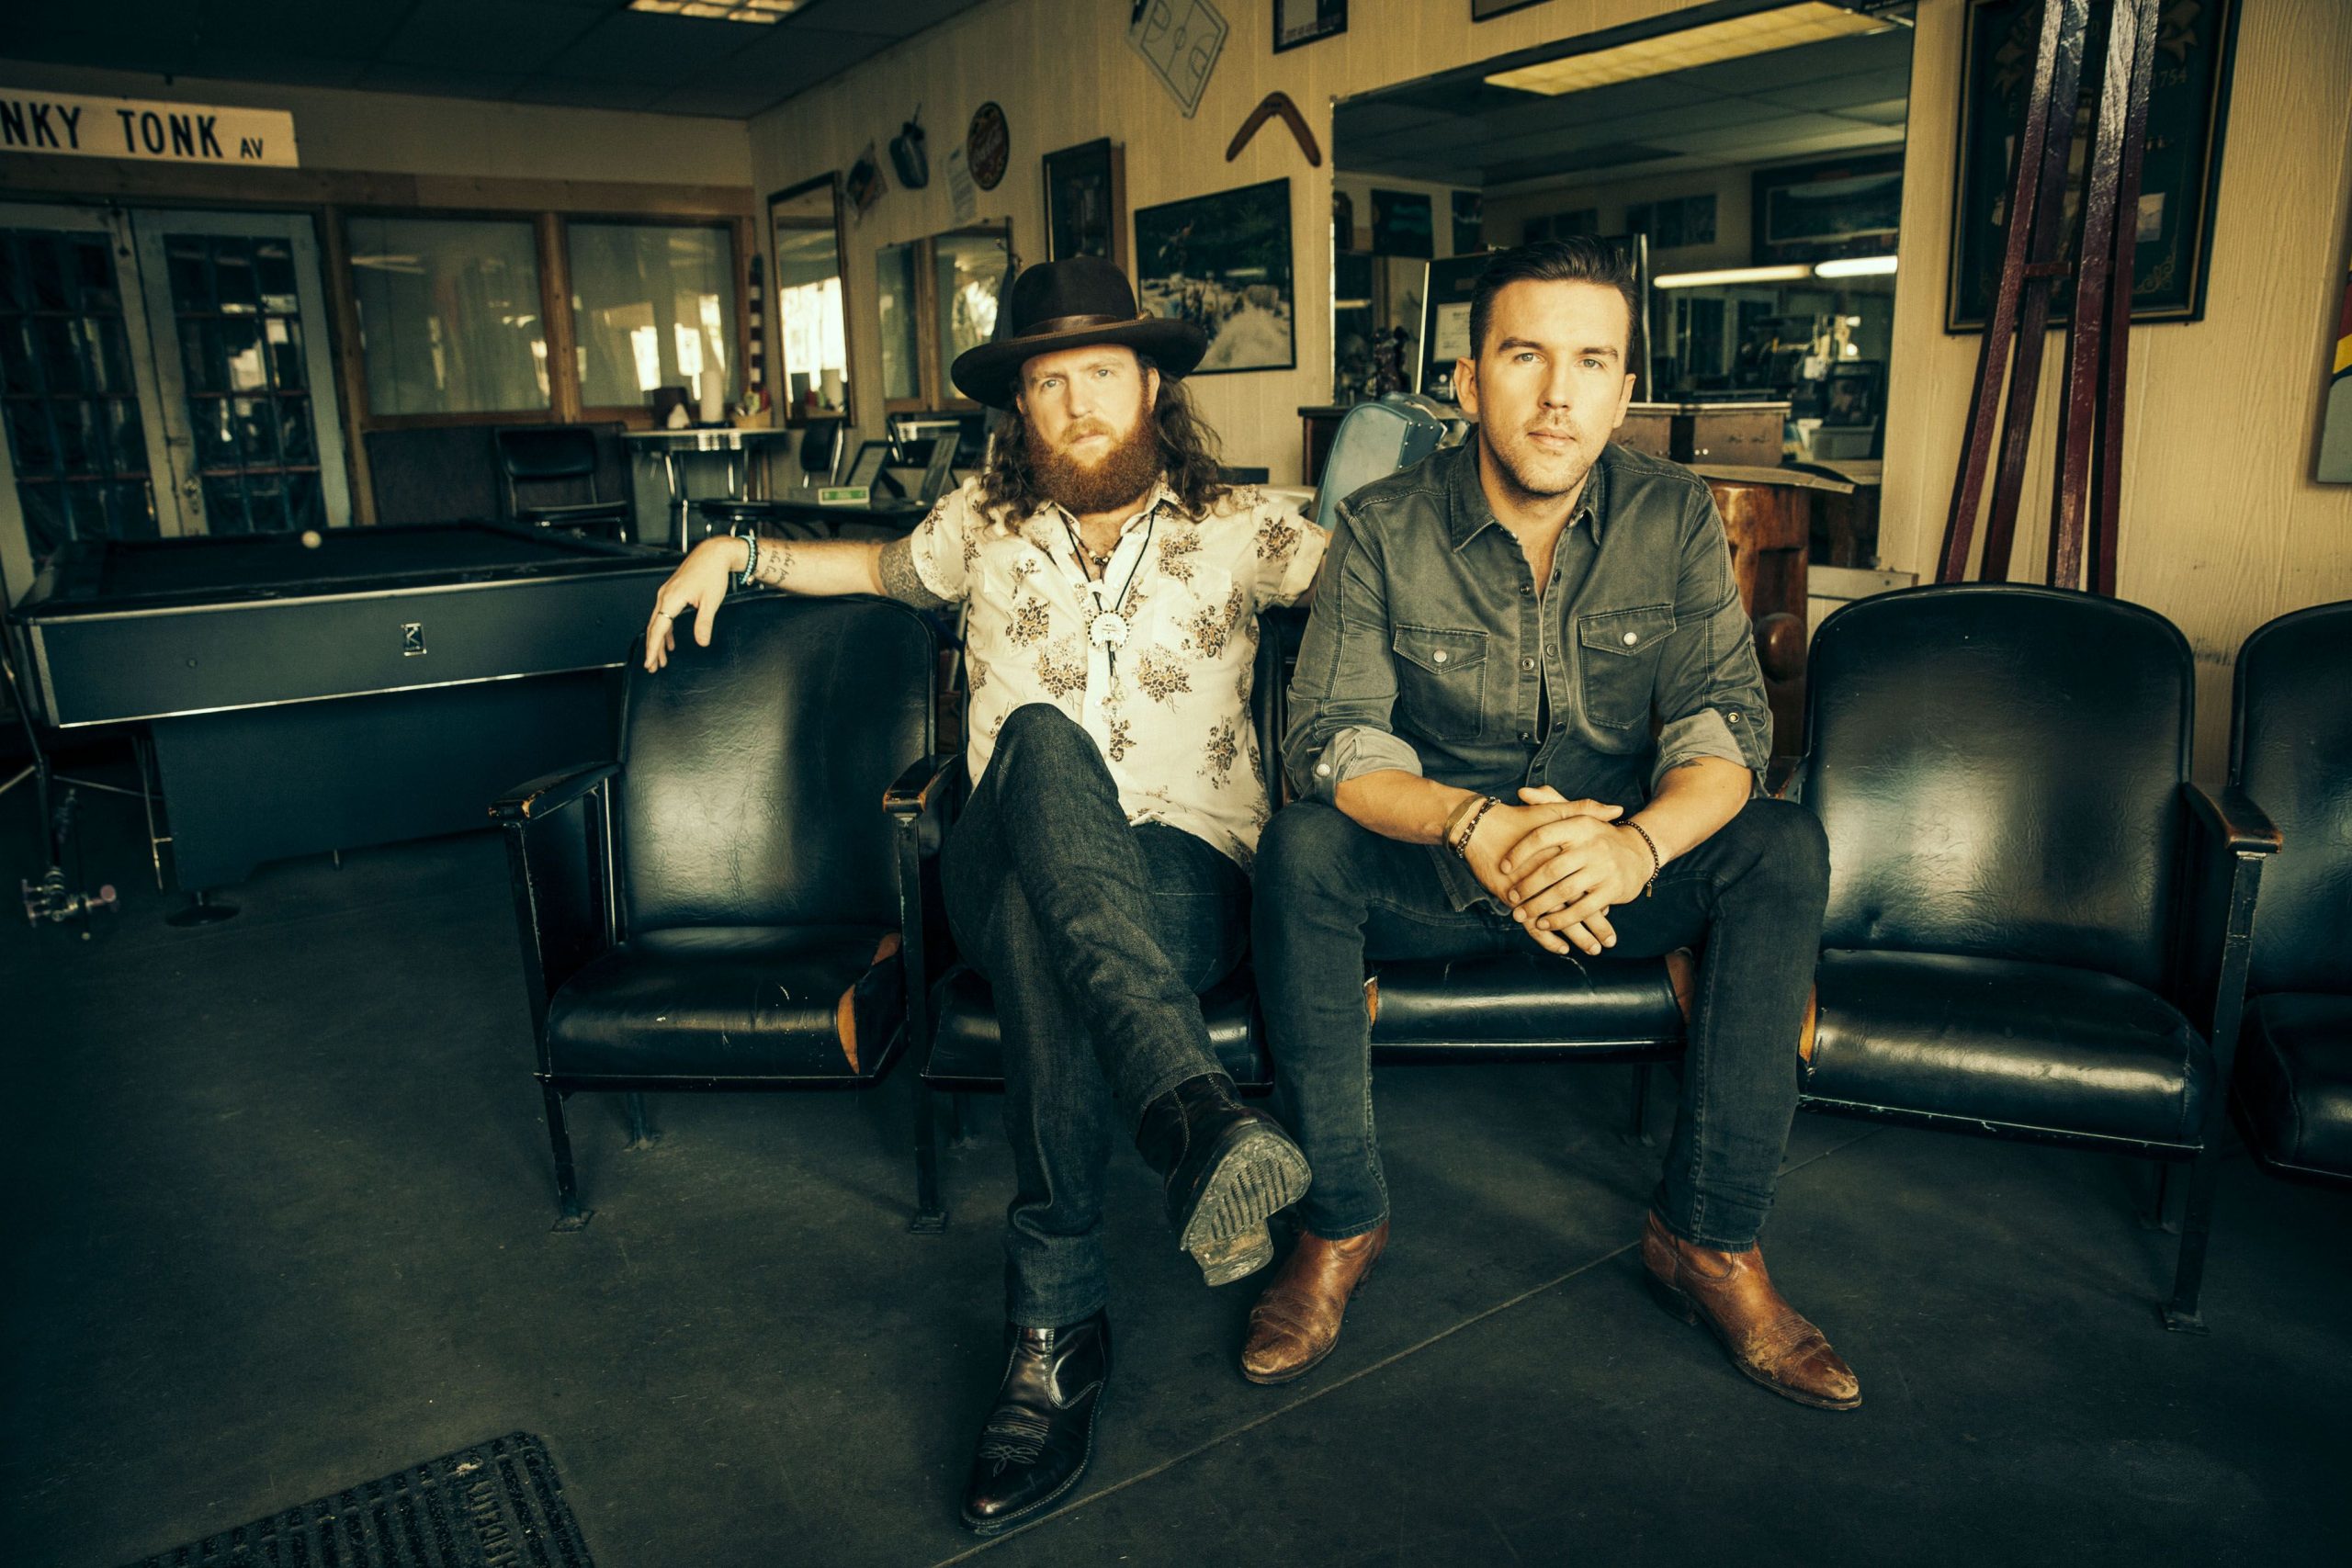 BROTHERS OSBORNE MAKES GRAND OLE OPRY DEBUT PERFORMING NEW SINGLE “21 SUMMER”